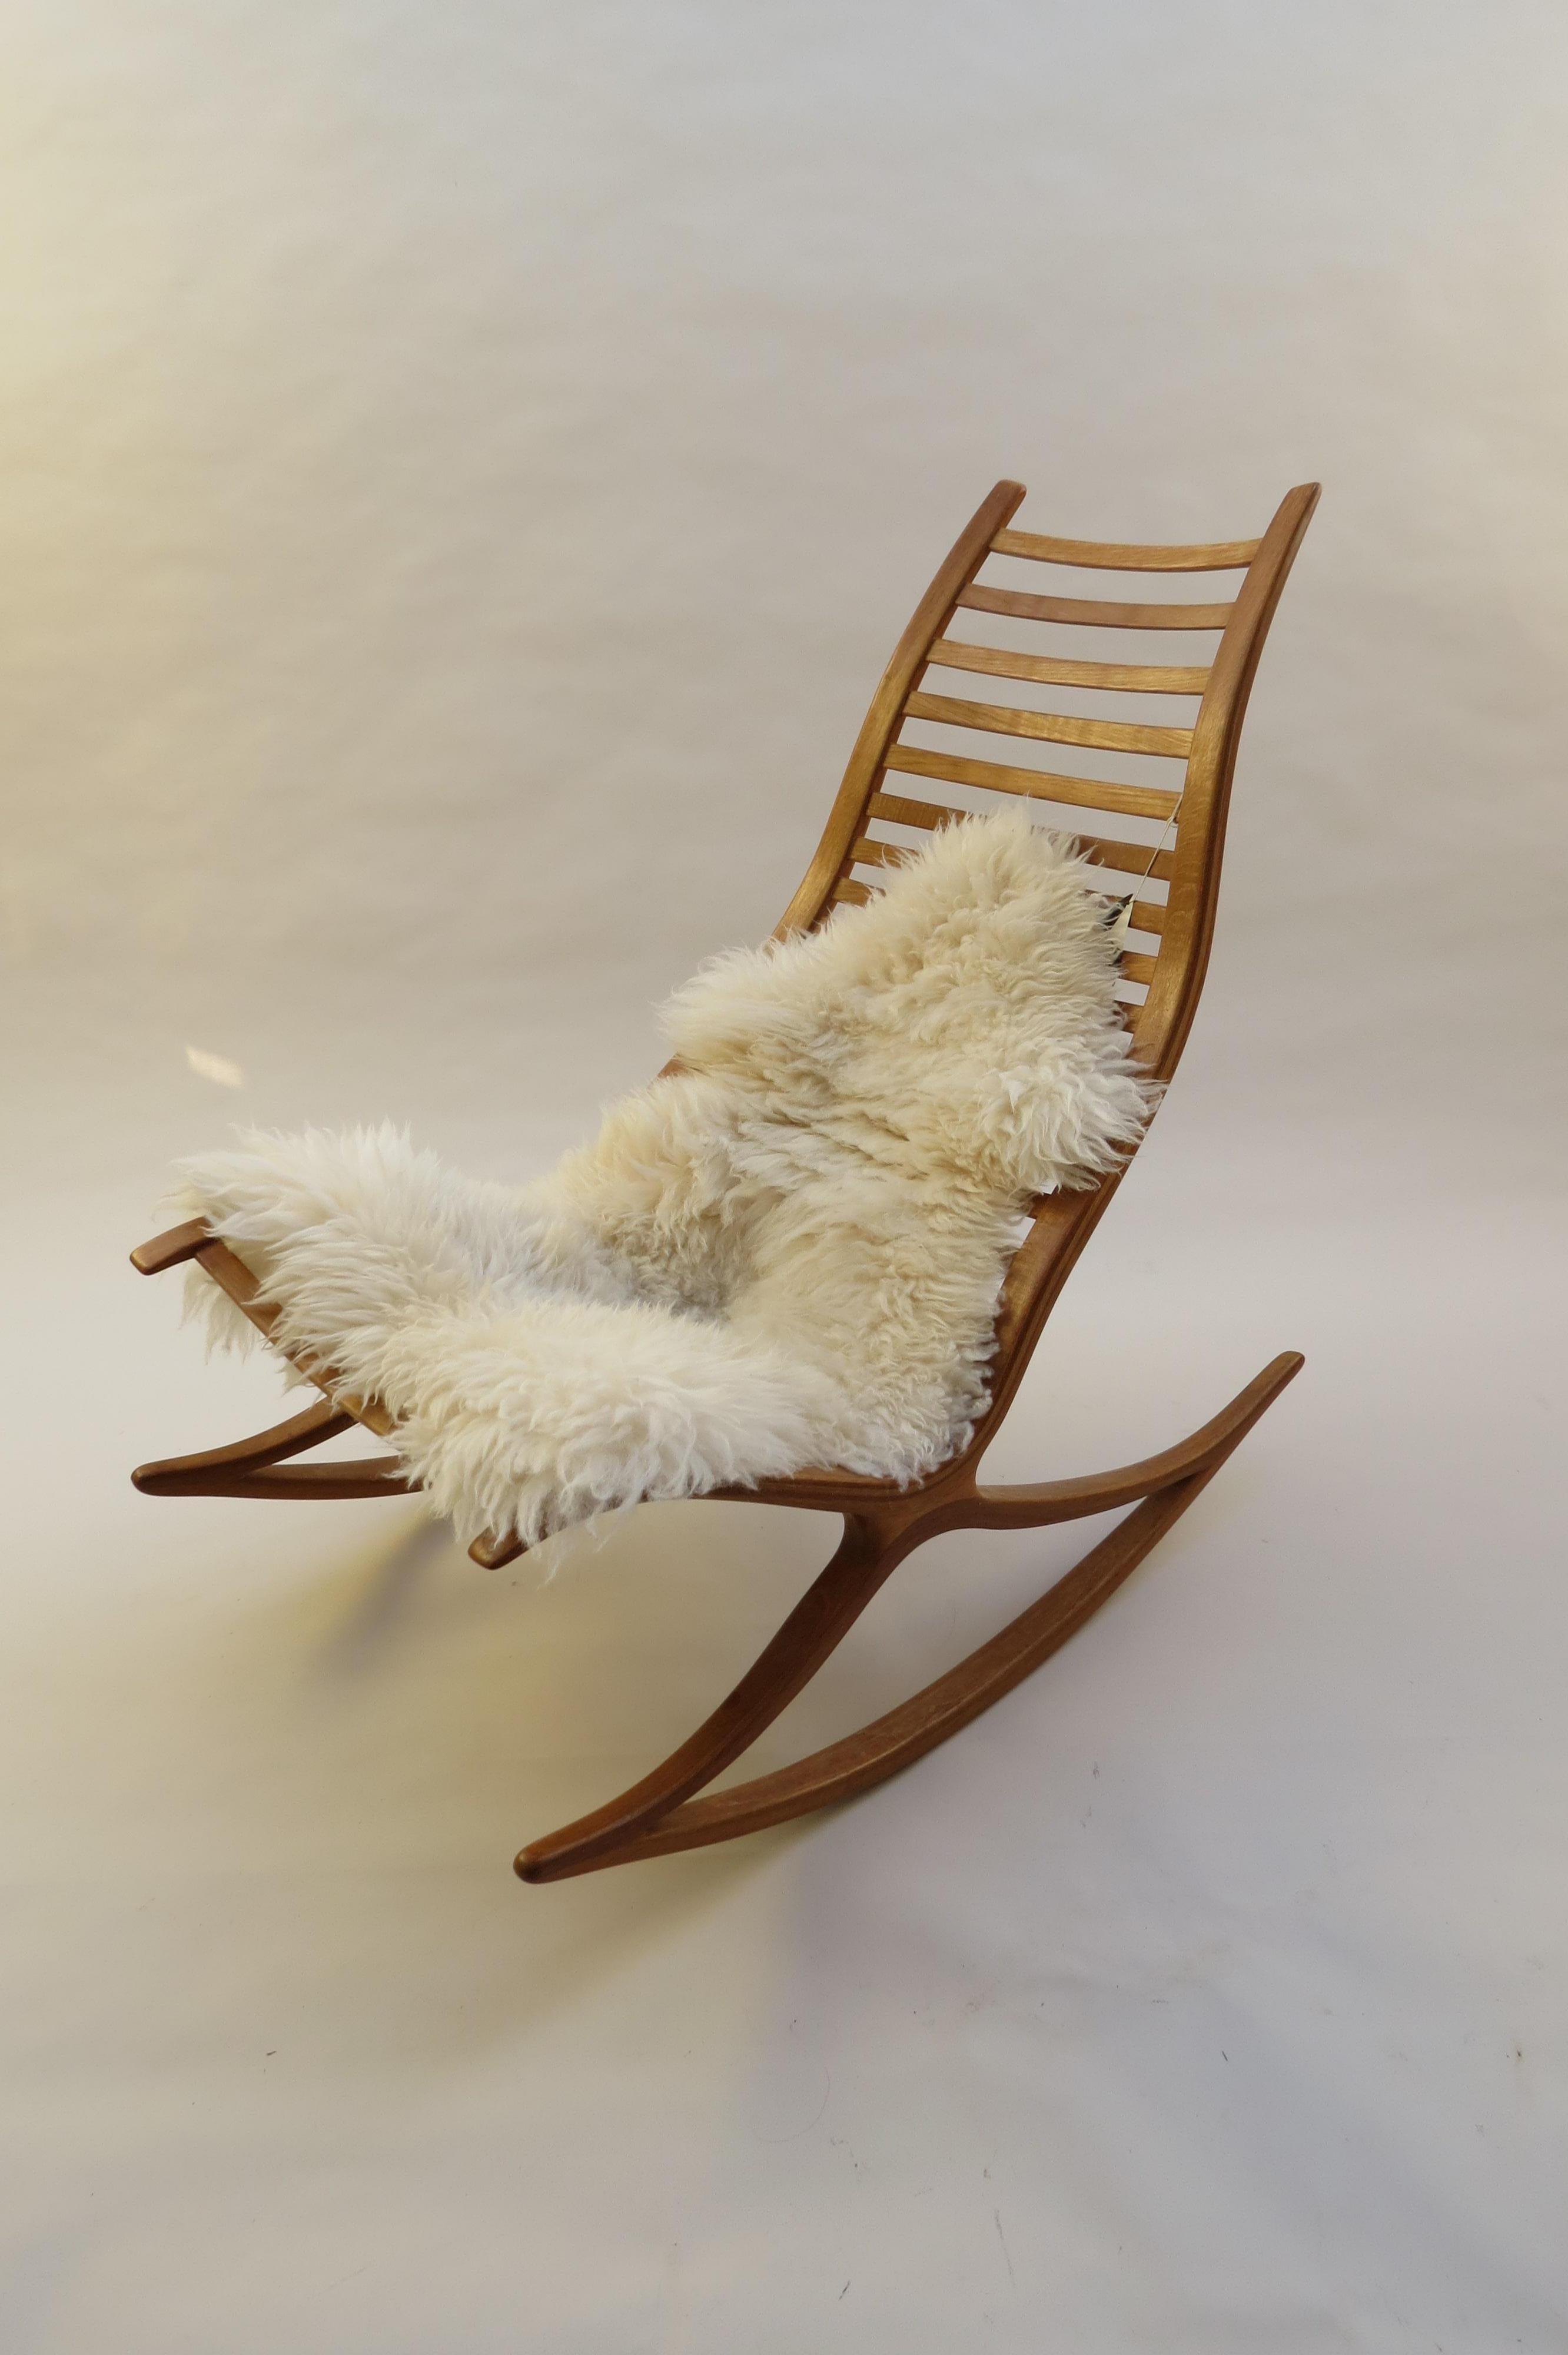 A stylish and sculptural hand produced rocking chair from the 1970s, designed and produced by Robin Williams, UK.

Made from laminated oak with a removable padded leather seat. Retains the original “Selected for Design Centre London”